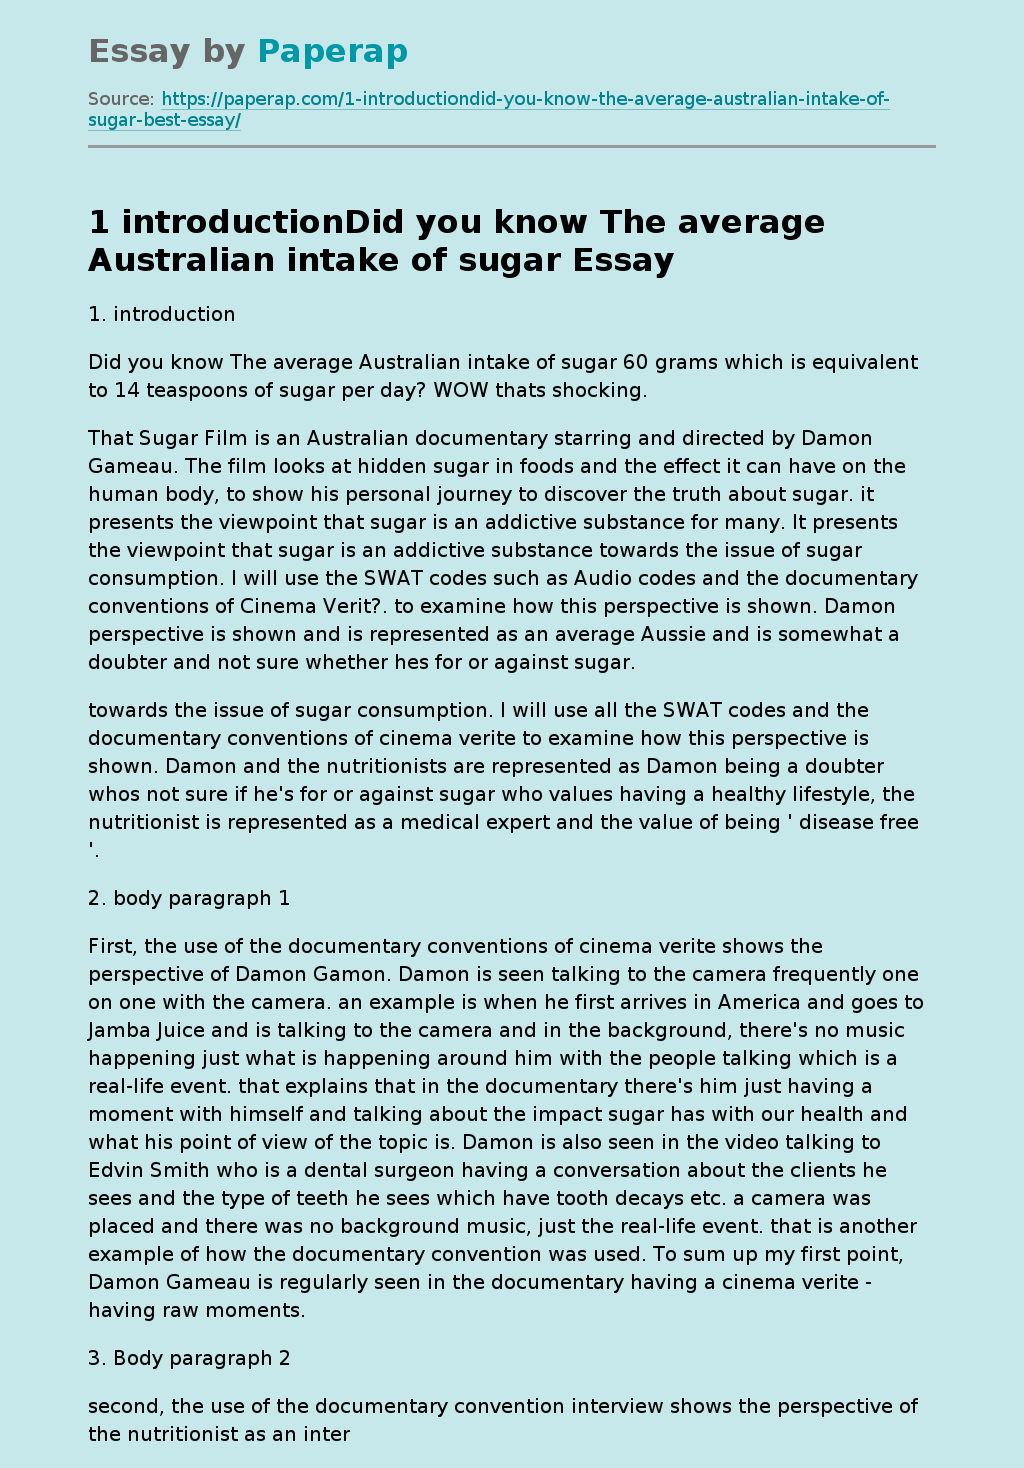 1 introductionDid you know The average Australian intake of sugar